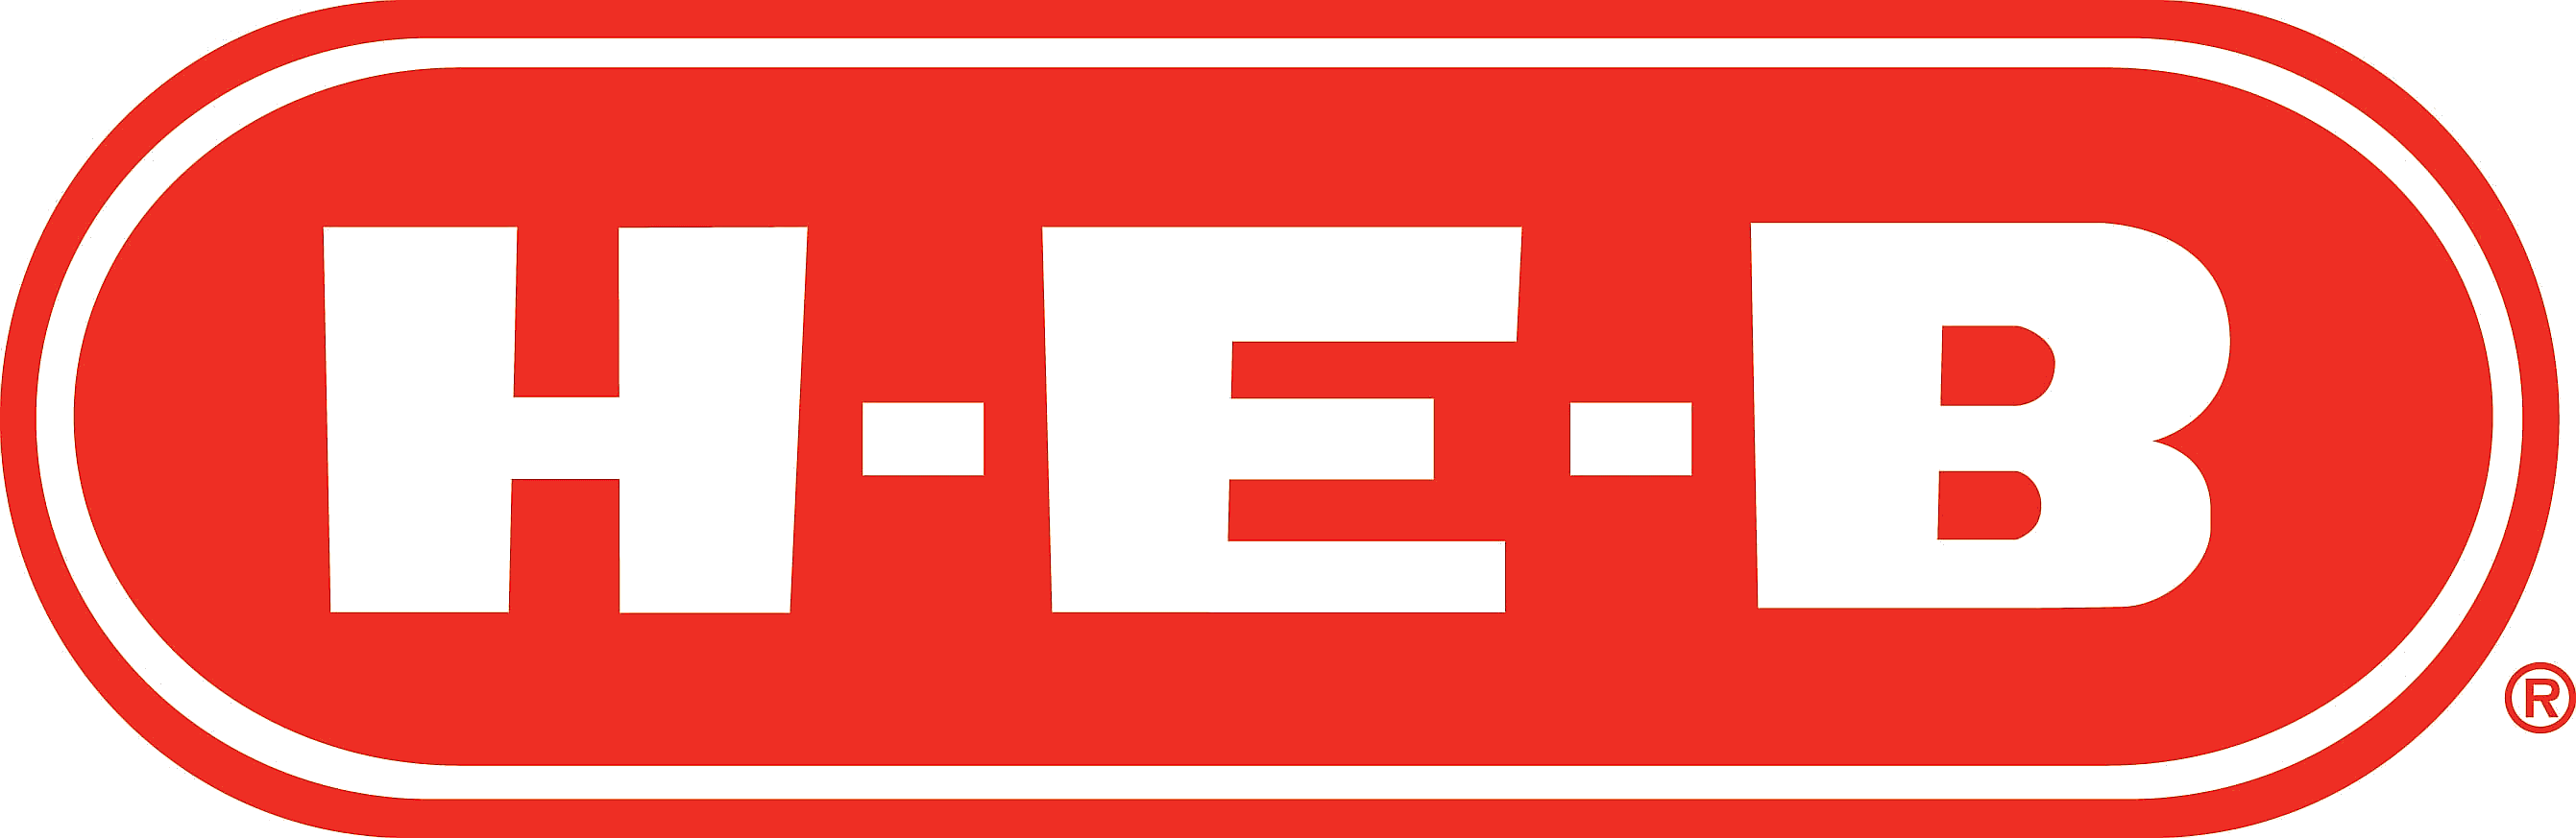 HEB Logo: Recognizable emblem of the HEB brand